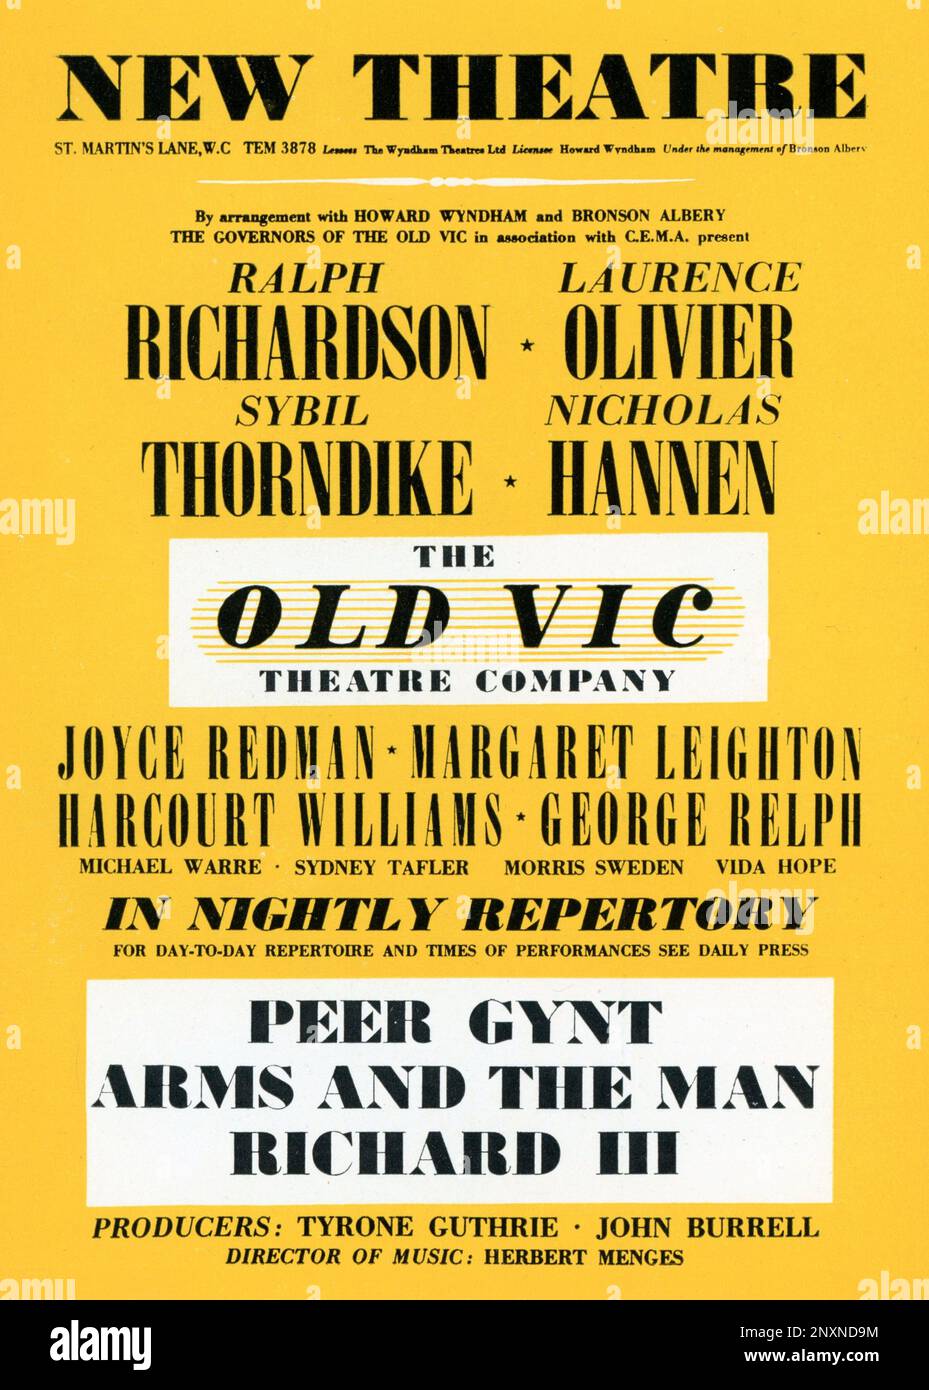 Playbill designed by S. JOHN WOODS for RALPH RICHARDSON LAURENCE OLIVIER SYBIL THORNDIKE NICHOLAS HANNEN JOYCE REDMAN and MARGARET LEIGHTON in The Old Vic Theatre Company 1st Season of Plays in Repertory 1944 - 1945 at the New Theatre, London consisting of PEER GYNT, ARMS AND THE MAN, and RICHARD III Stock Photo